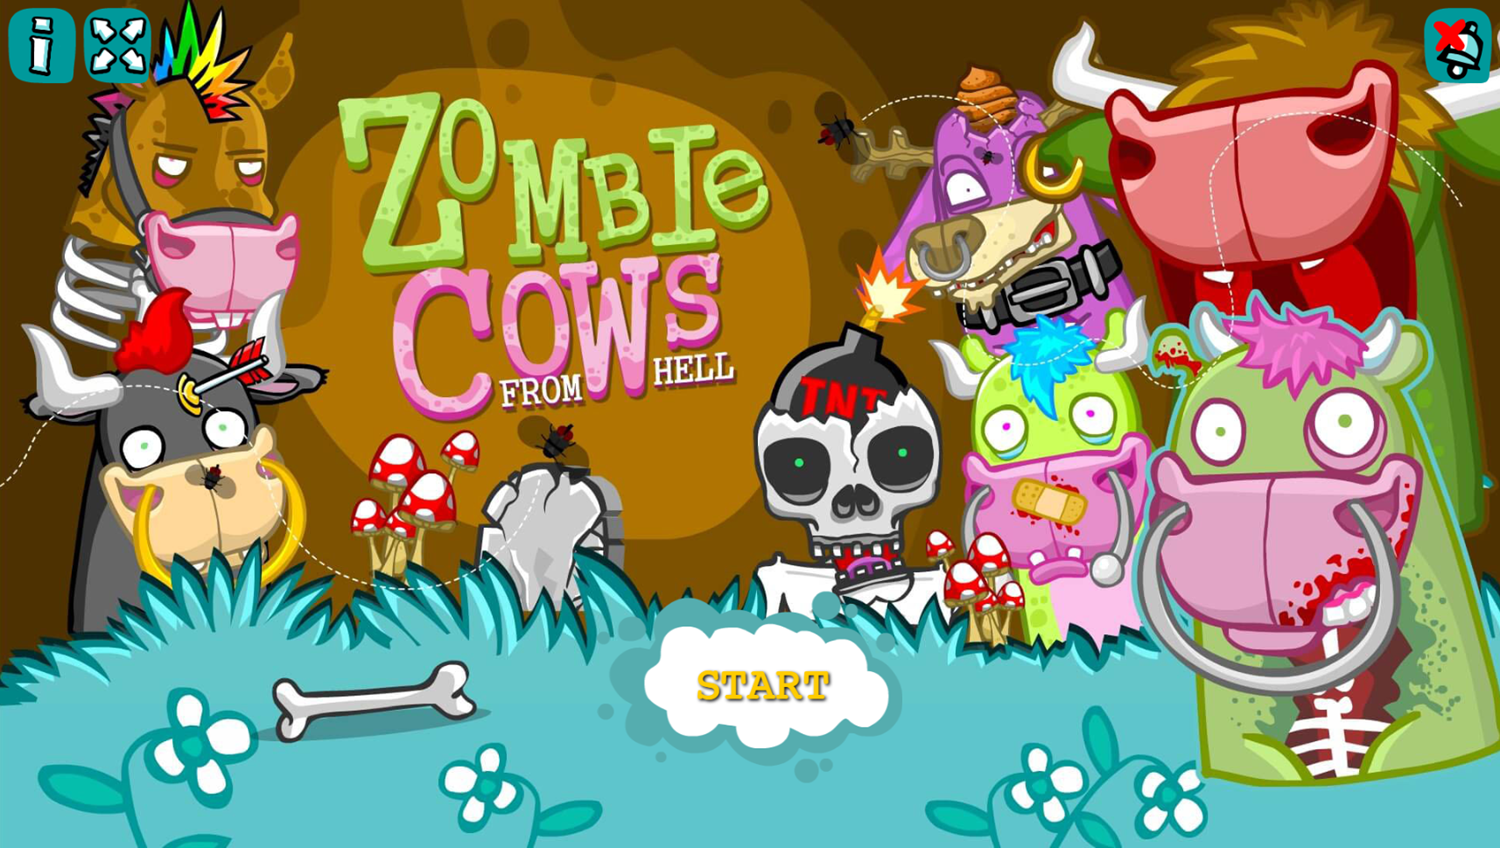 Zombie Cows From Hell Game Welcome Screen Screenshot.